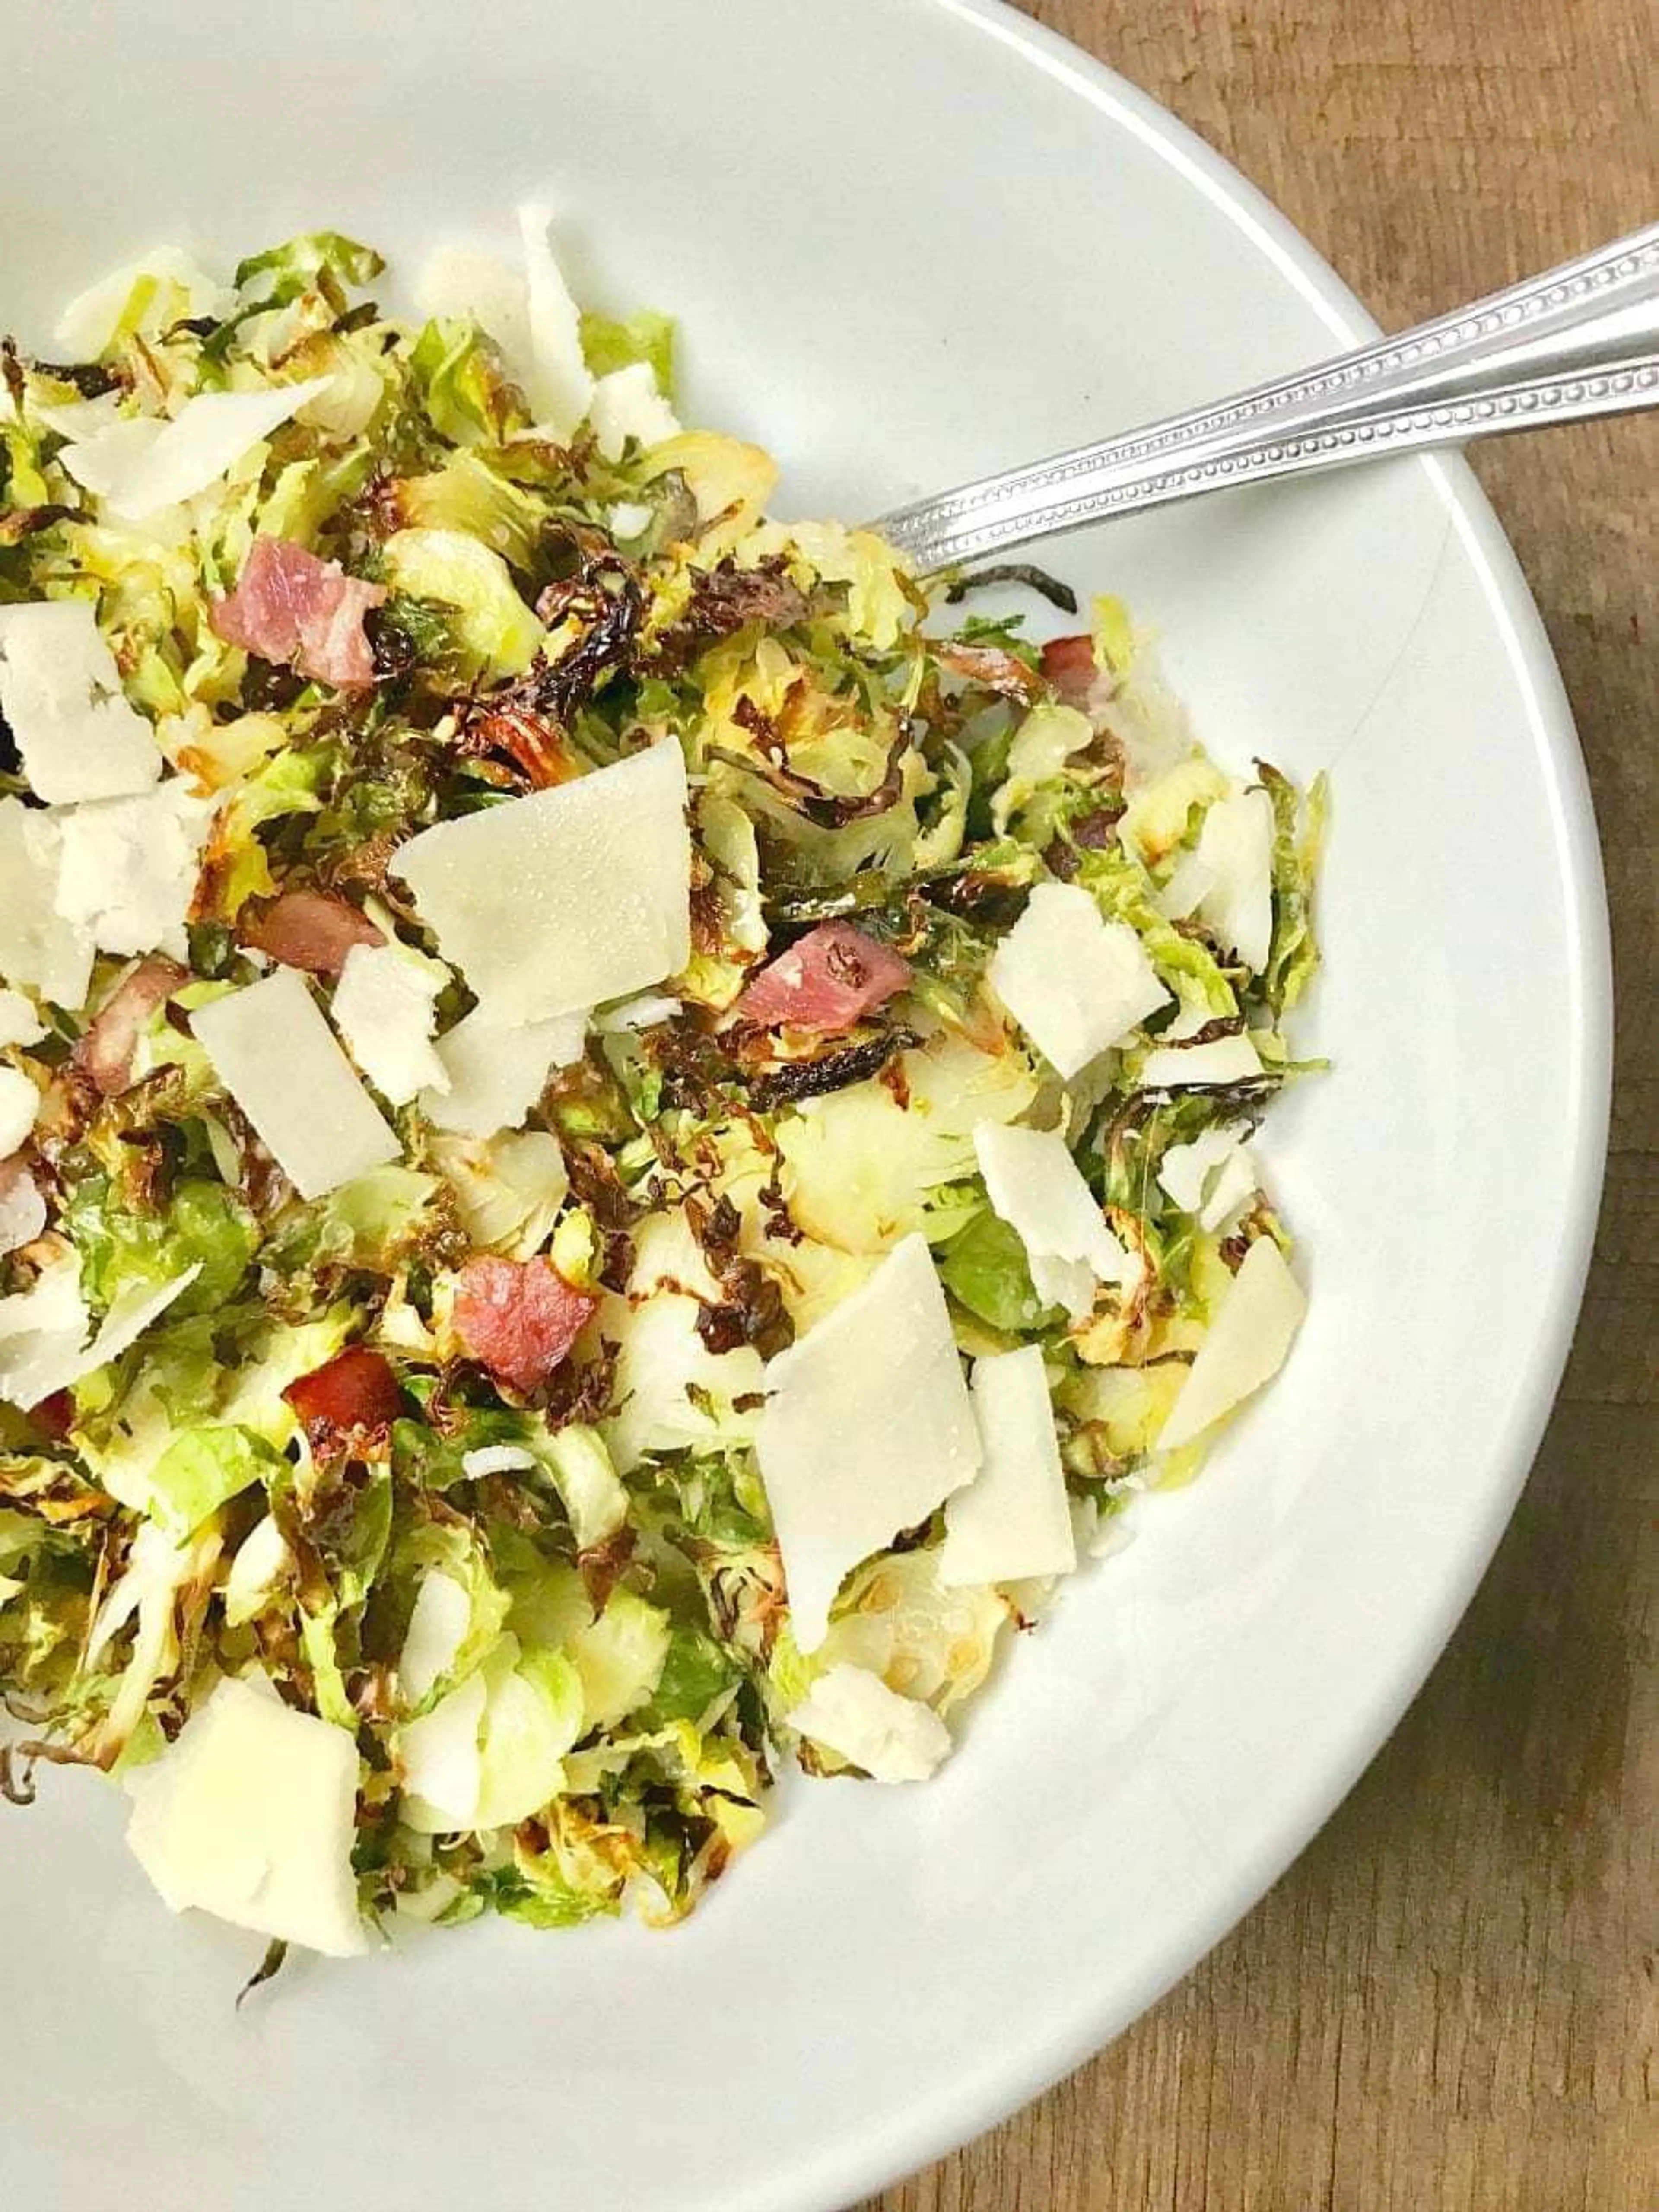 Crispy Brussels Sprouts with Bacon, Parmesan, and Balsamic